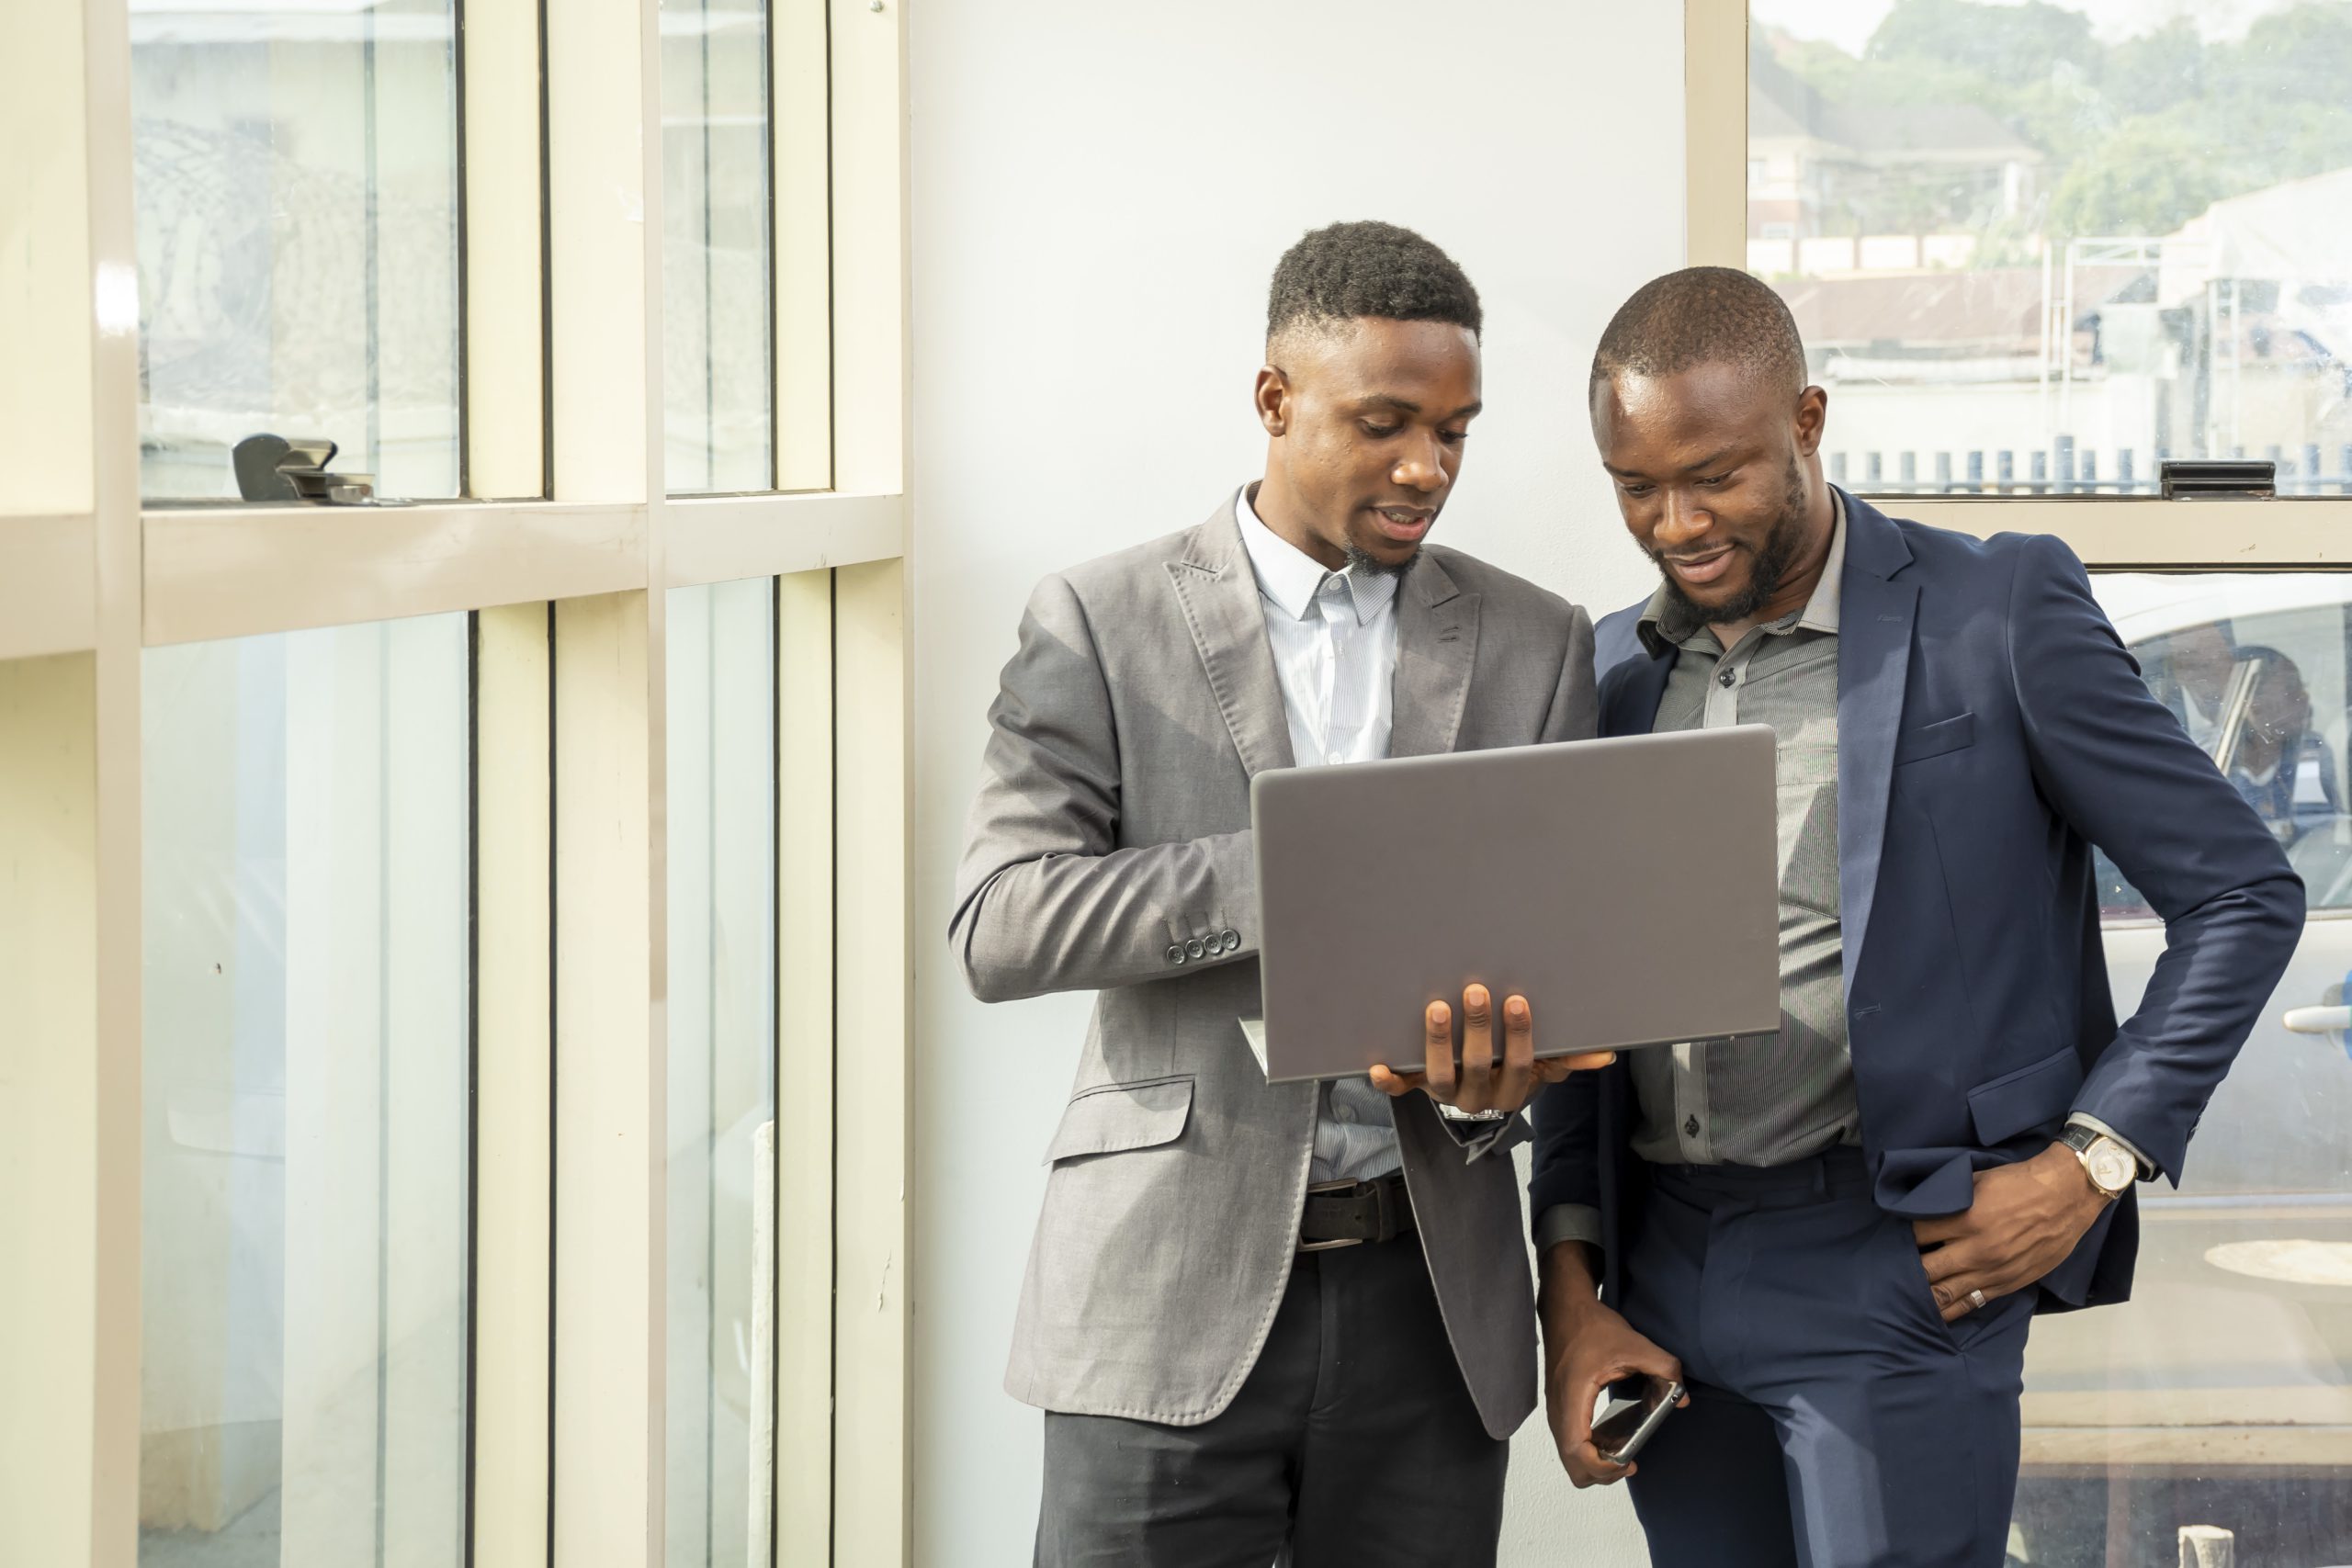 Two young black businessmen standing together holding a laptop, discussing business